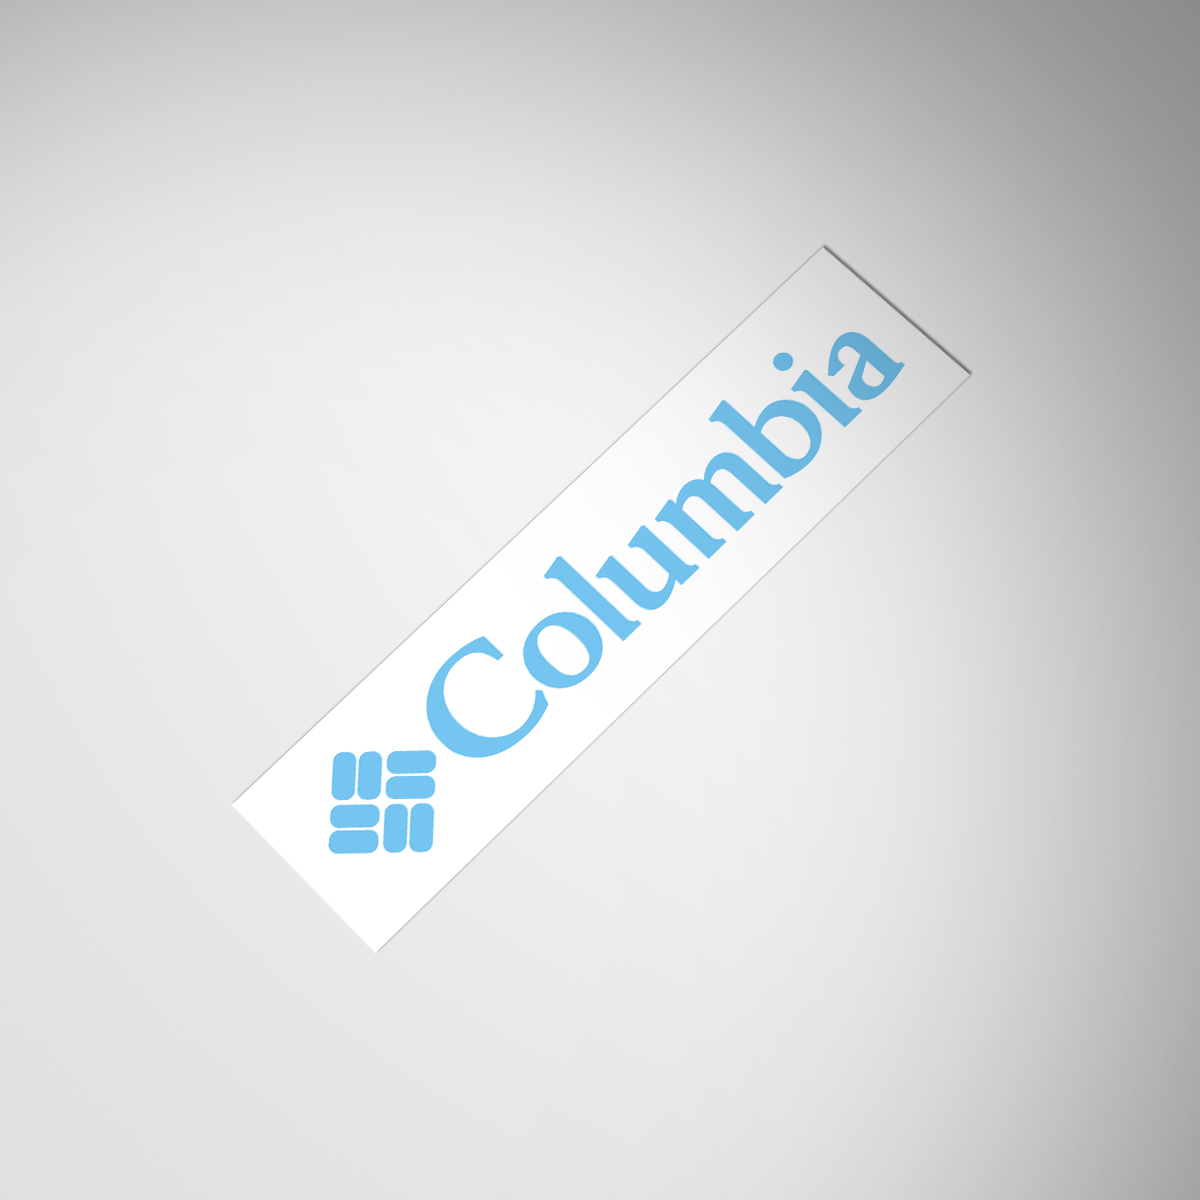 Suitable for Columbia decal sticker Colombia outdoor sports body glass sticker decal